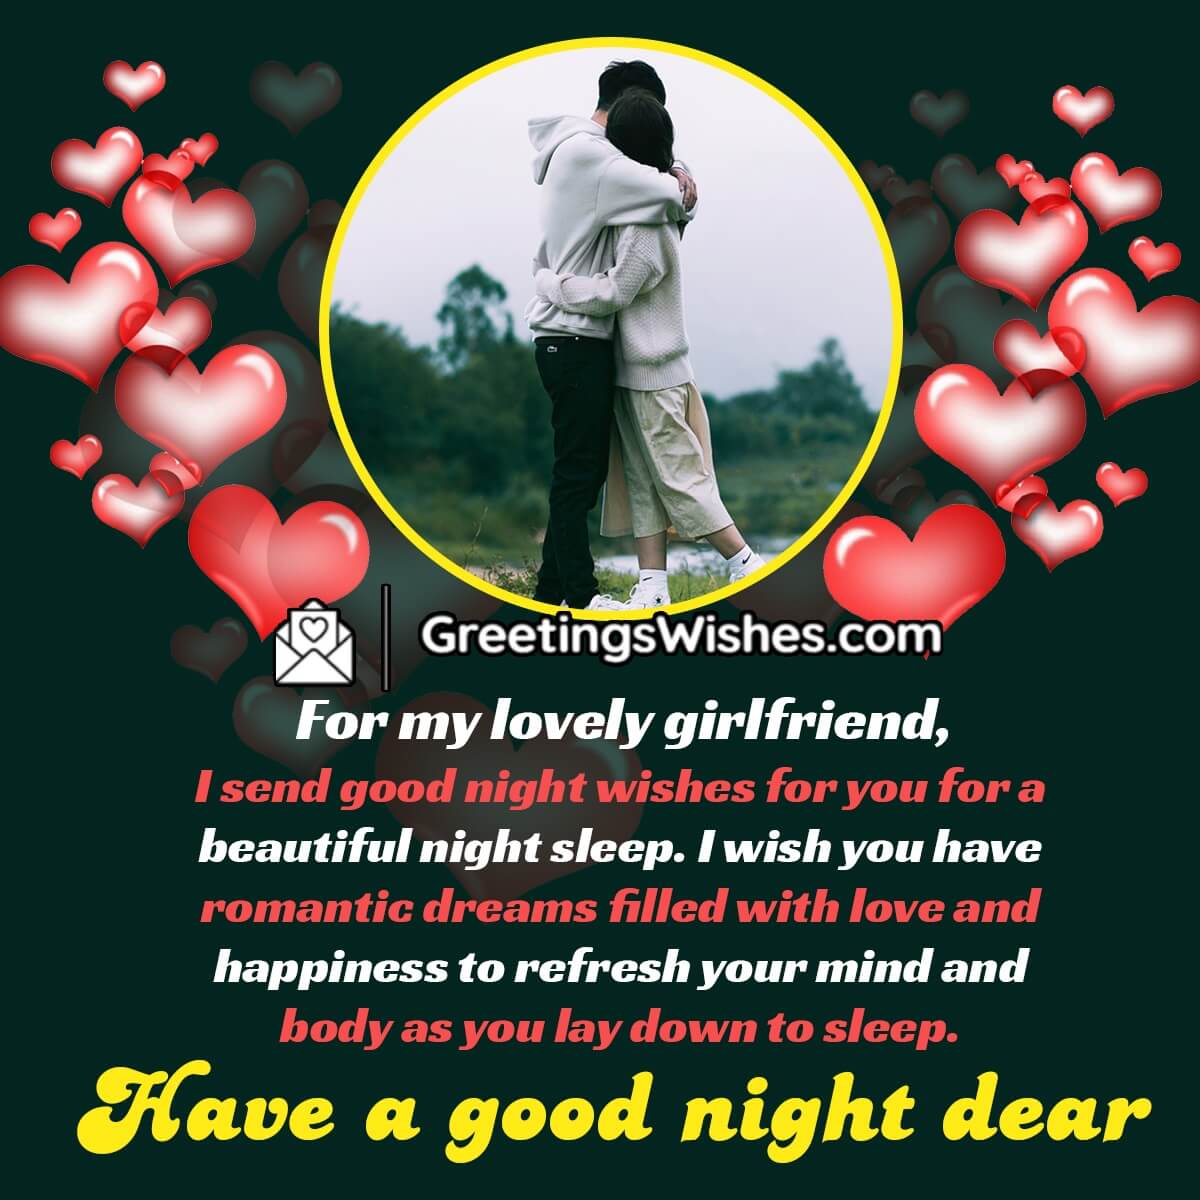 Good Night Messages for Girlfriend - Greetings Wishes